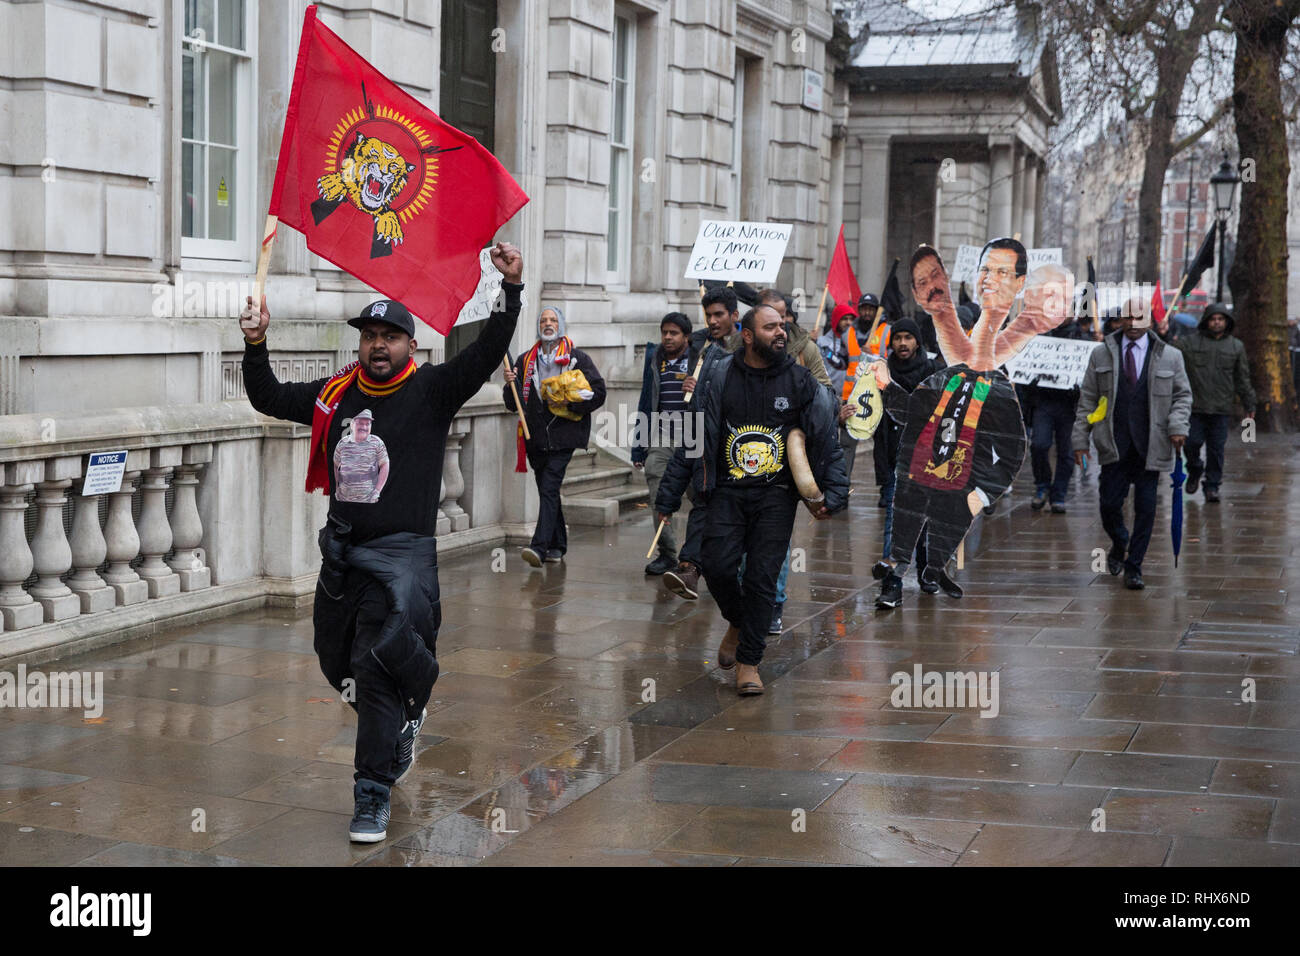 London, UK. 4th Feb, 2019. Tamils protest in Whitehall on Sri Lanka Independence Day to call for the release of political prisoners, an independent war crimes commission, information on missing people, the return of occupied land and a right to self-determination for the Tamil population. Credit: Mark Kerrison/Alamy Live News Stock Photo